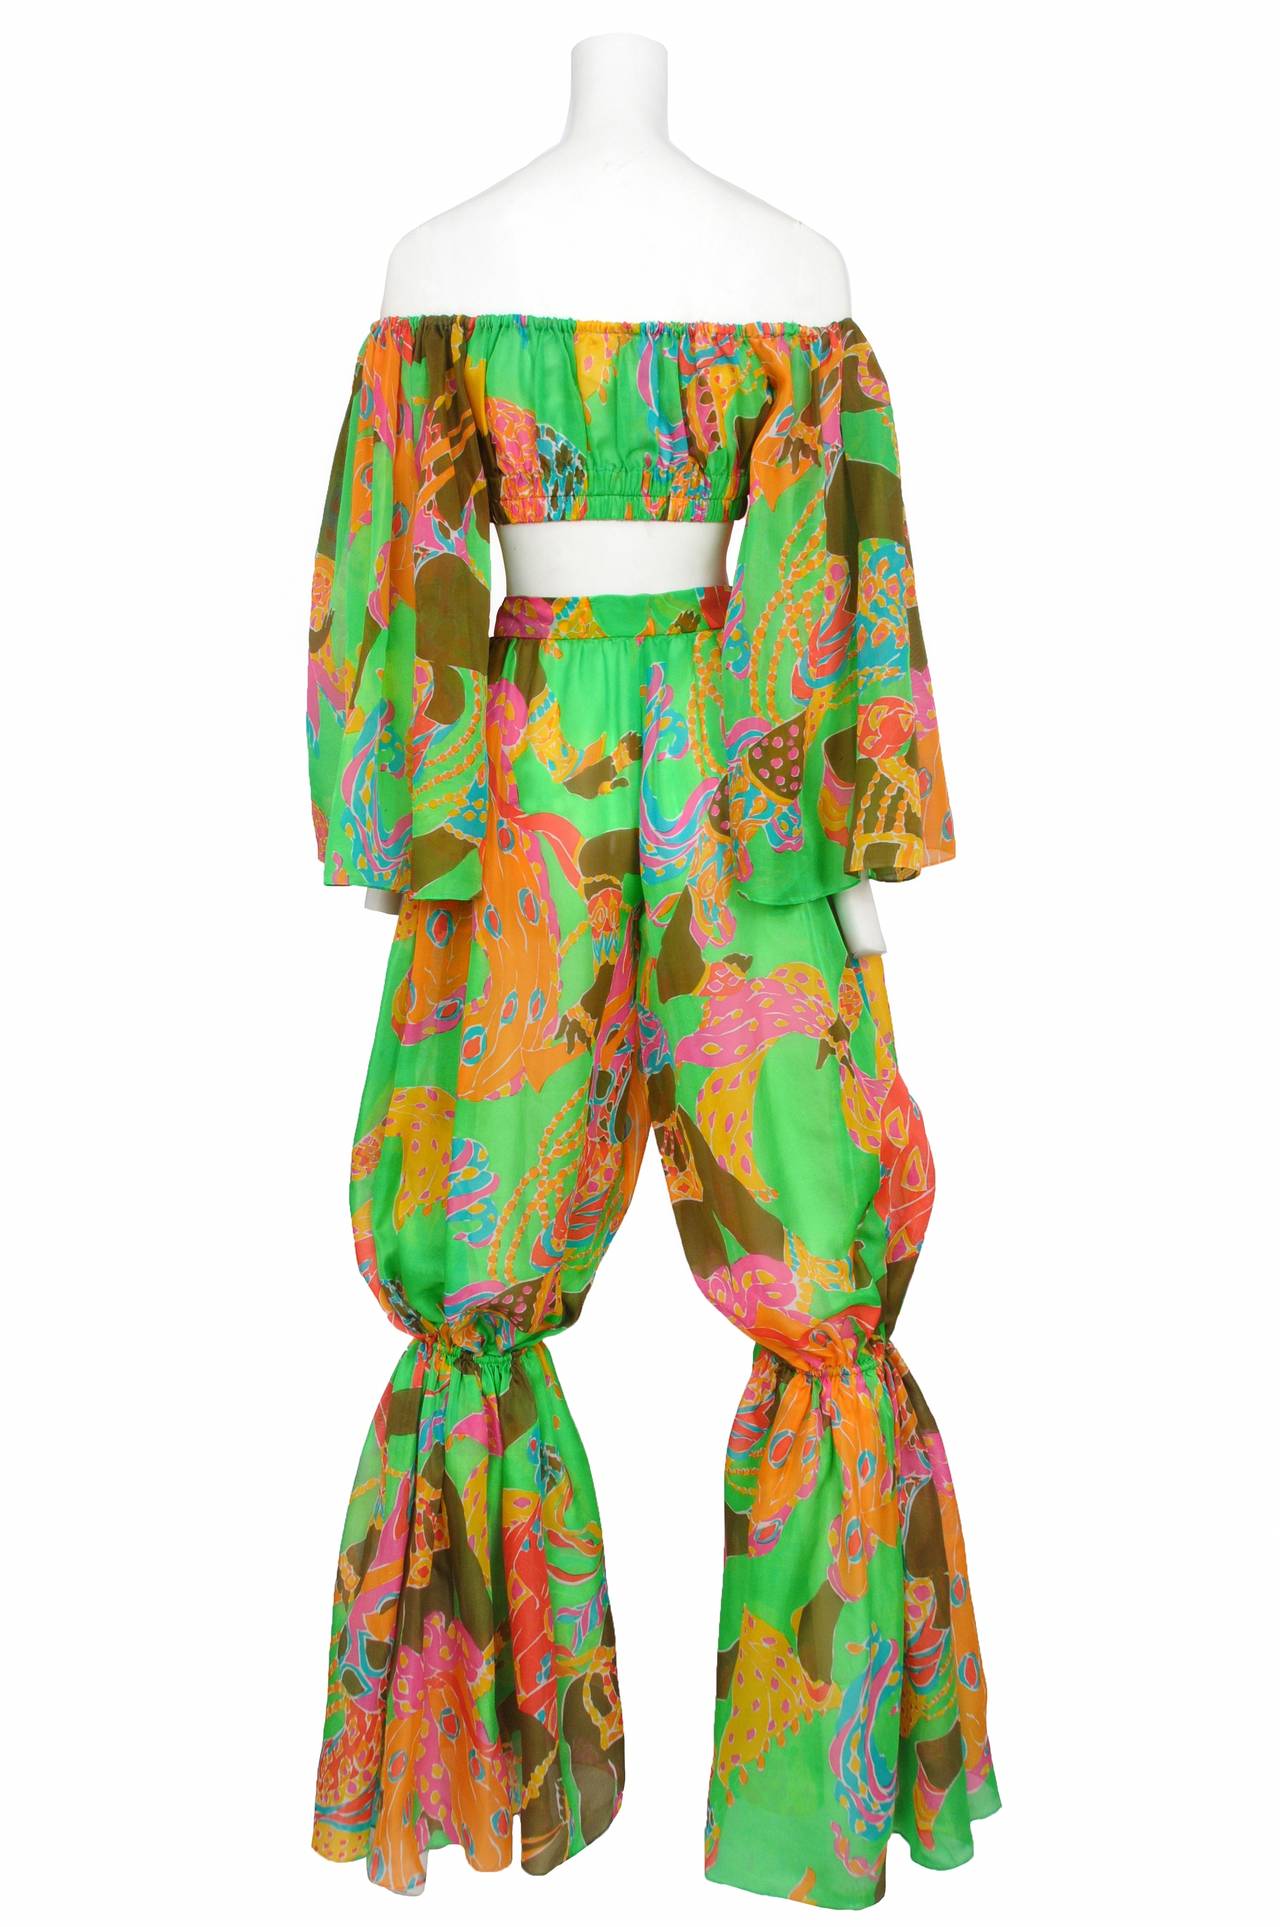 Vintage Yves Saint Laurent acid green psychedelic Ballets Russes 'Arabian Nights' print two peice silk organdy ensemble. The ensemble features a silk organdy crop top with elastic neckline and waistband and features large bell sleeves. The ensemble